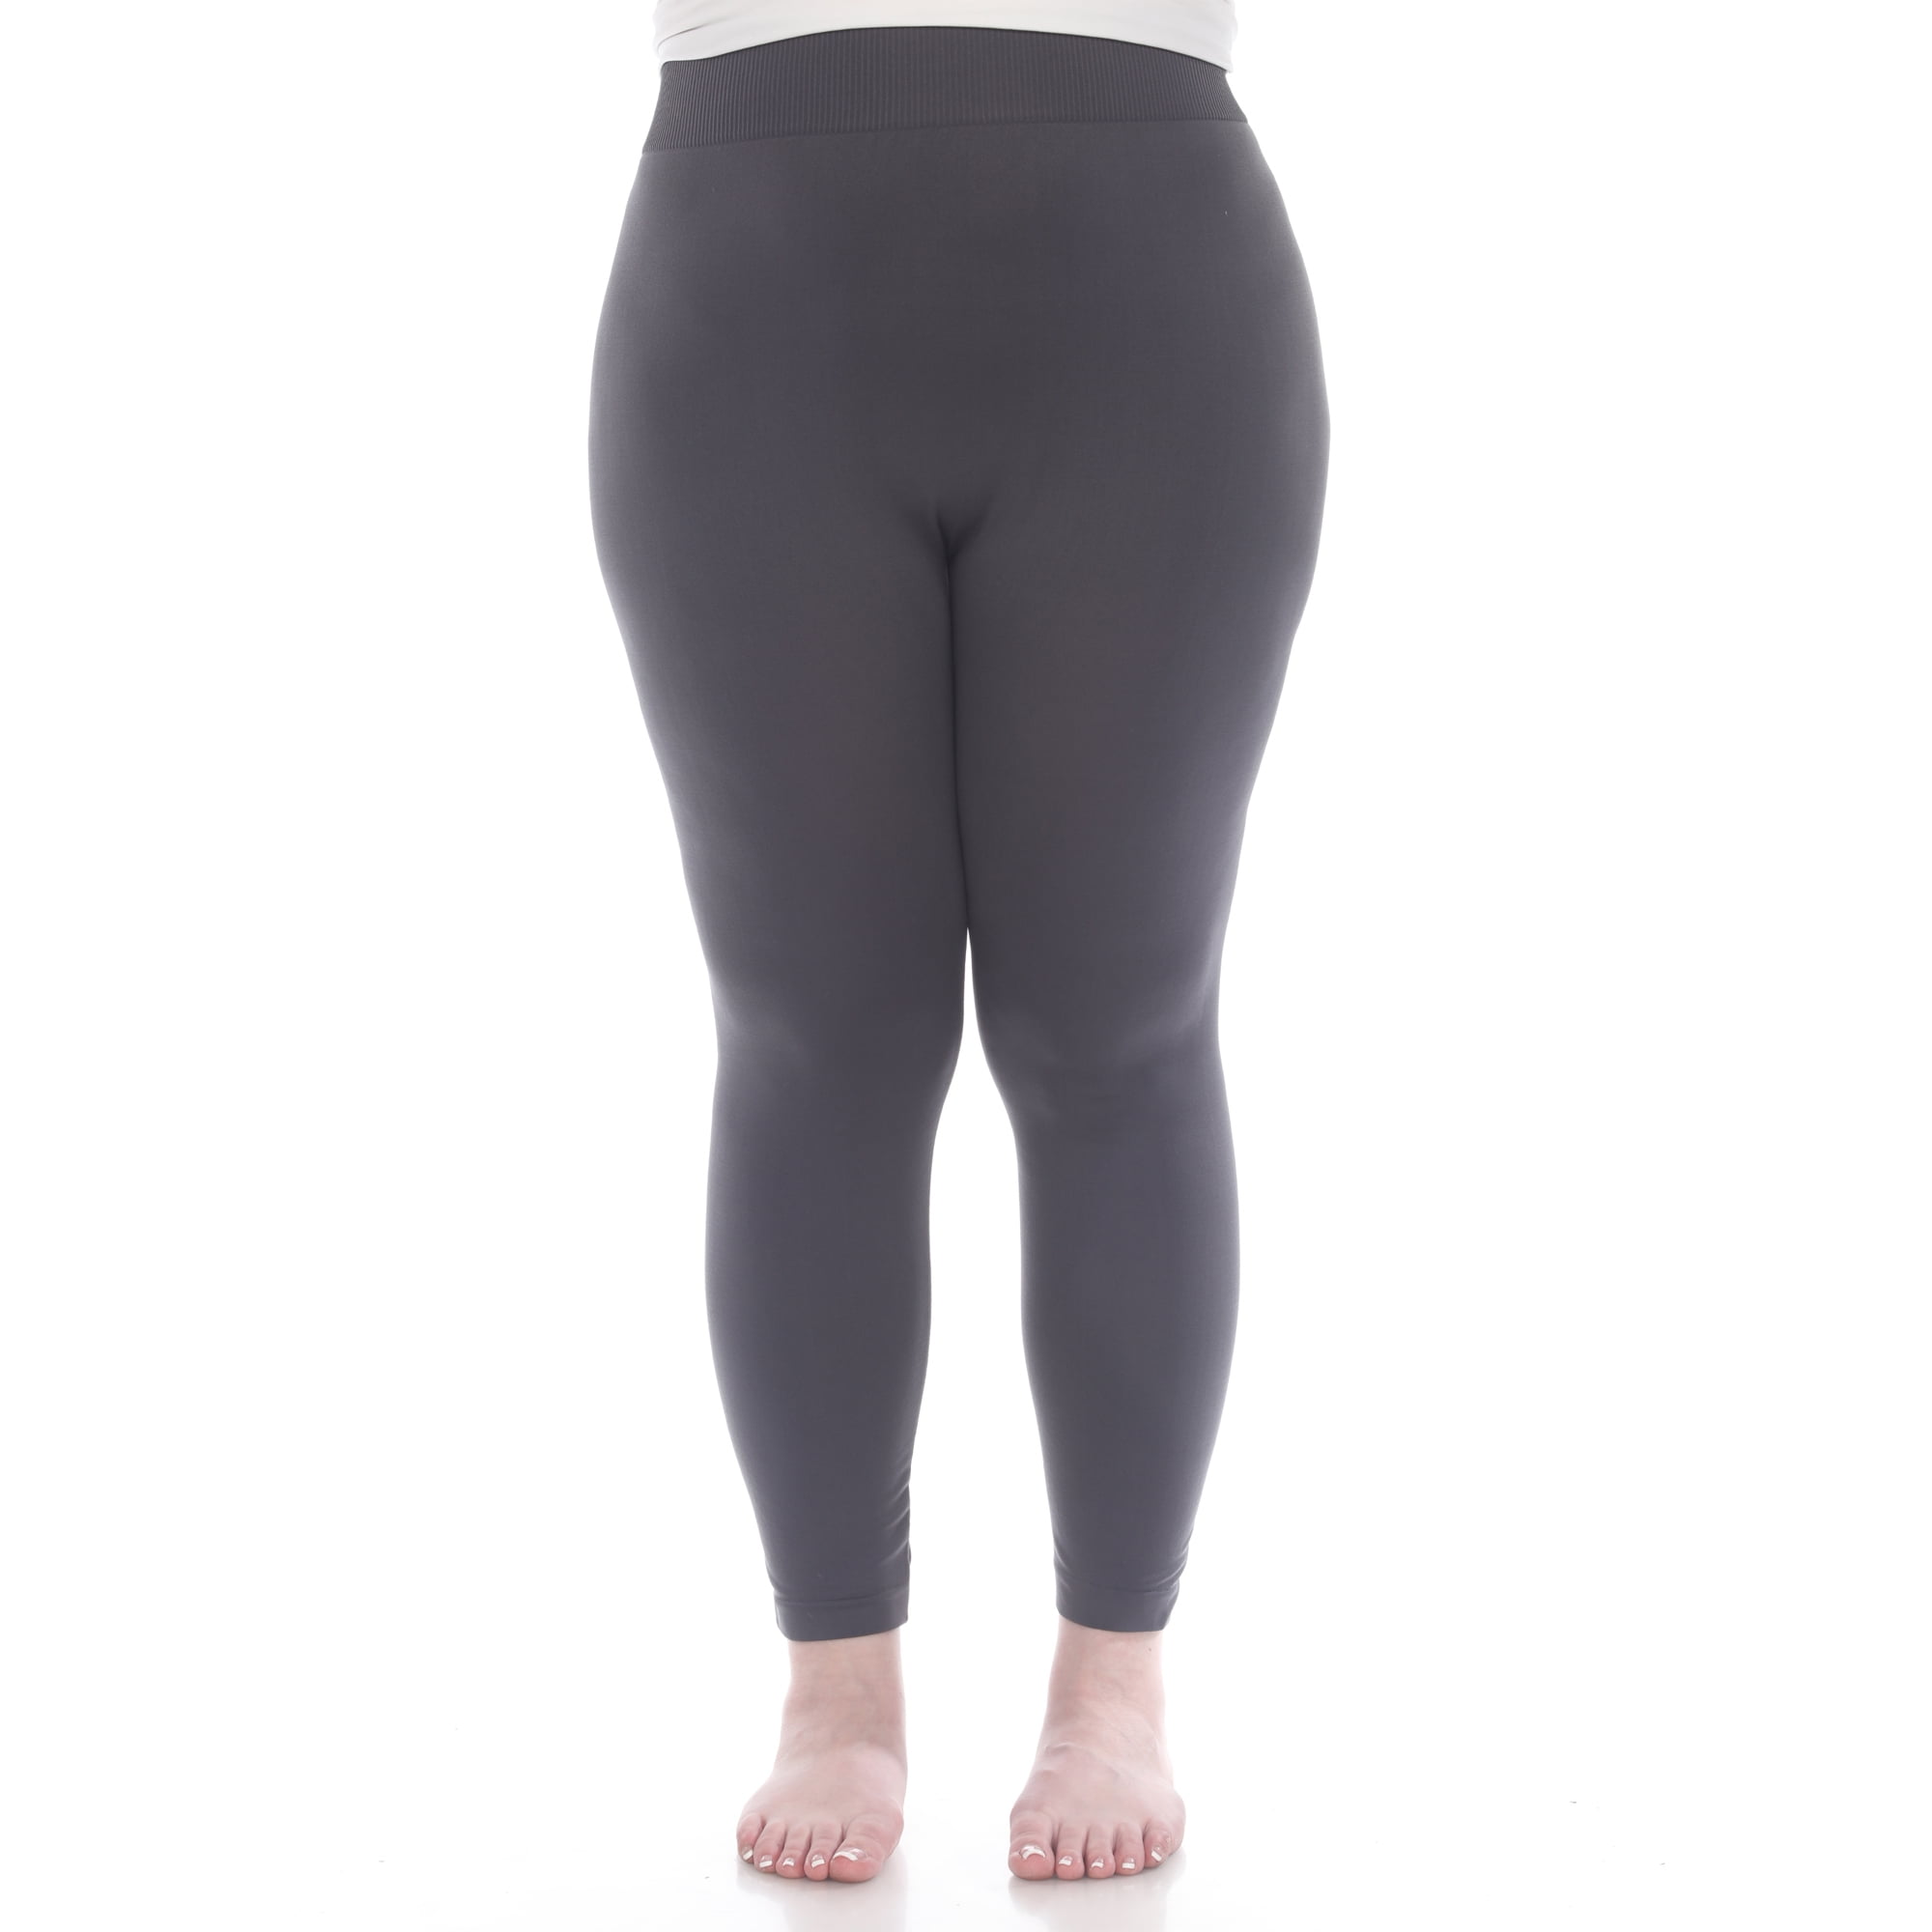 Women's Plus Size 1 Waistband Solid Peach Skin Leggings. - 1 Elastic  Waistband - Full-Length - Inseam approximately 28 - One size fits most plus  16-20 - 92% Polyester / 8% Spandex, 7300939